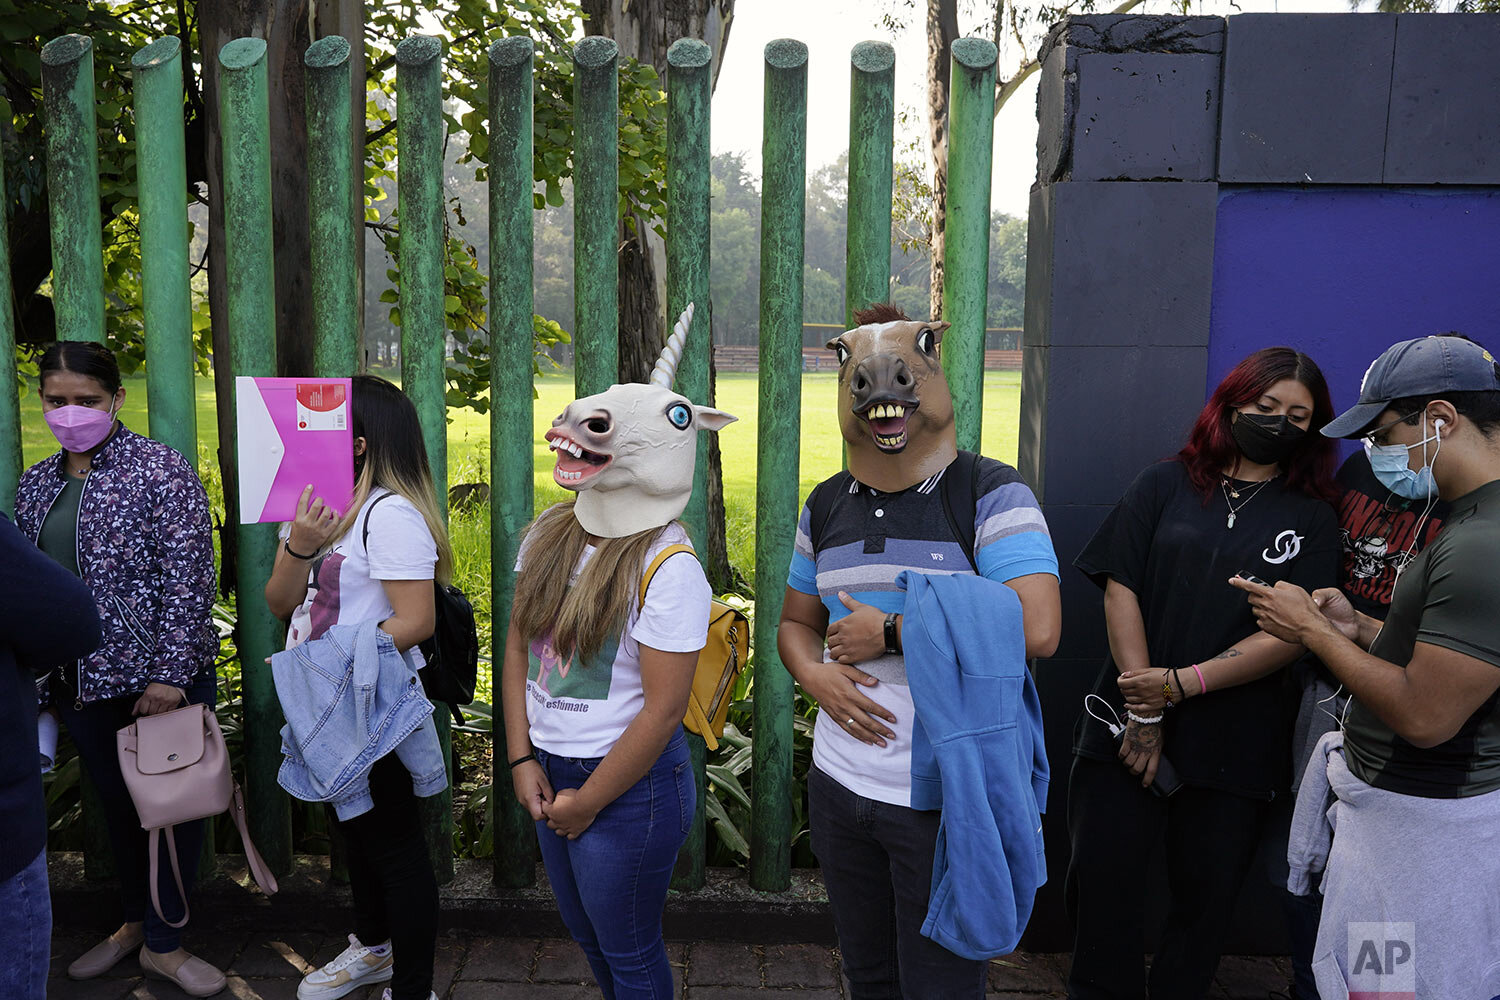  Youths, some wearing masks, wait in line to be vaccinated with the Pfizer vaccine for COVID-19 during a campaign for people between ages18-29 in Mexico City, Aug. 19, 2021. Xochimilco encouraged youths to arrive in costumes and compete for prizes if